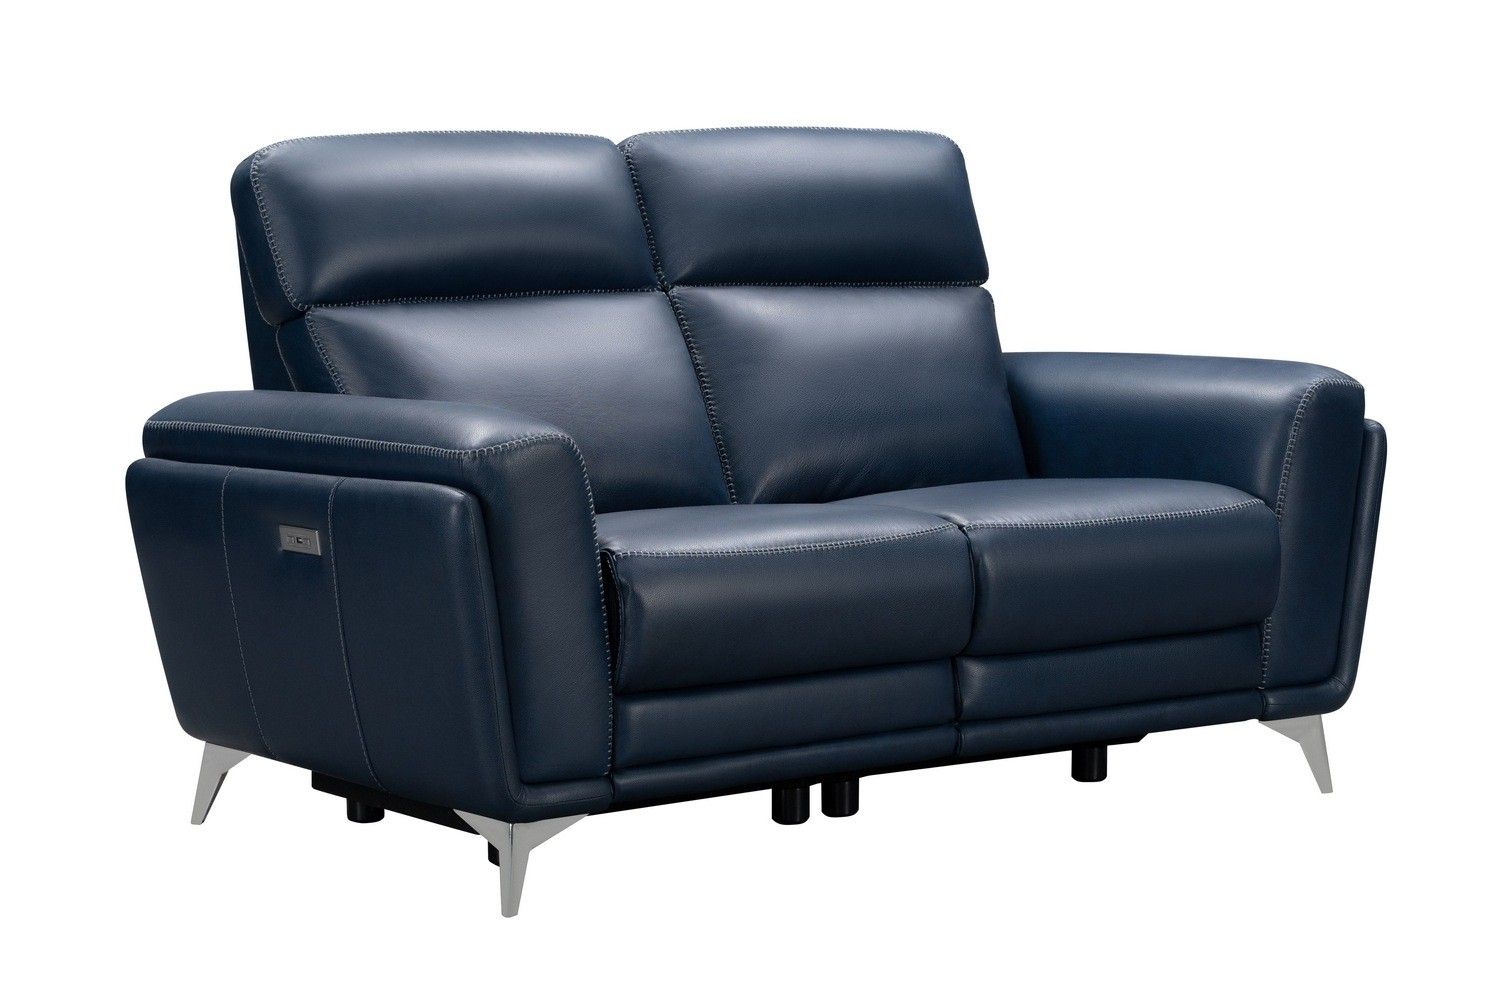 Barcalounger Cameron Power Reclining Loveseat With Power Intended For Marco Leather Power Reclining Sofas (View 3 of 15)